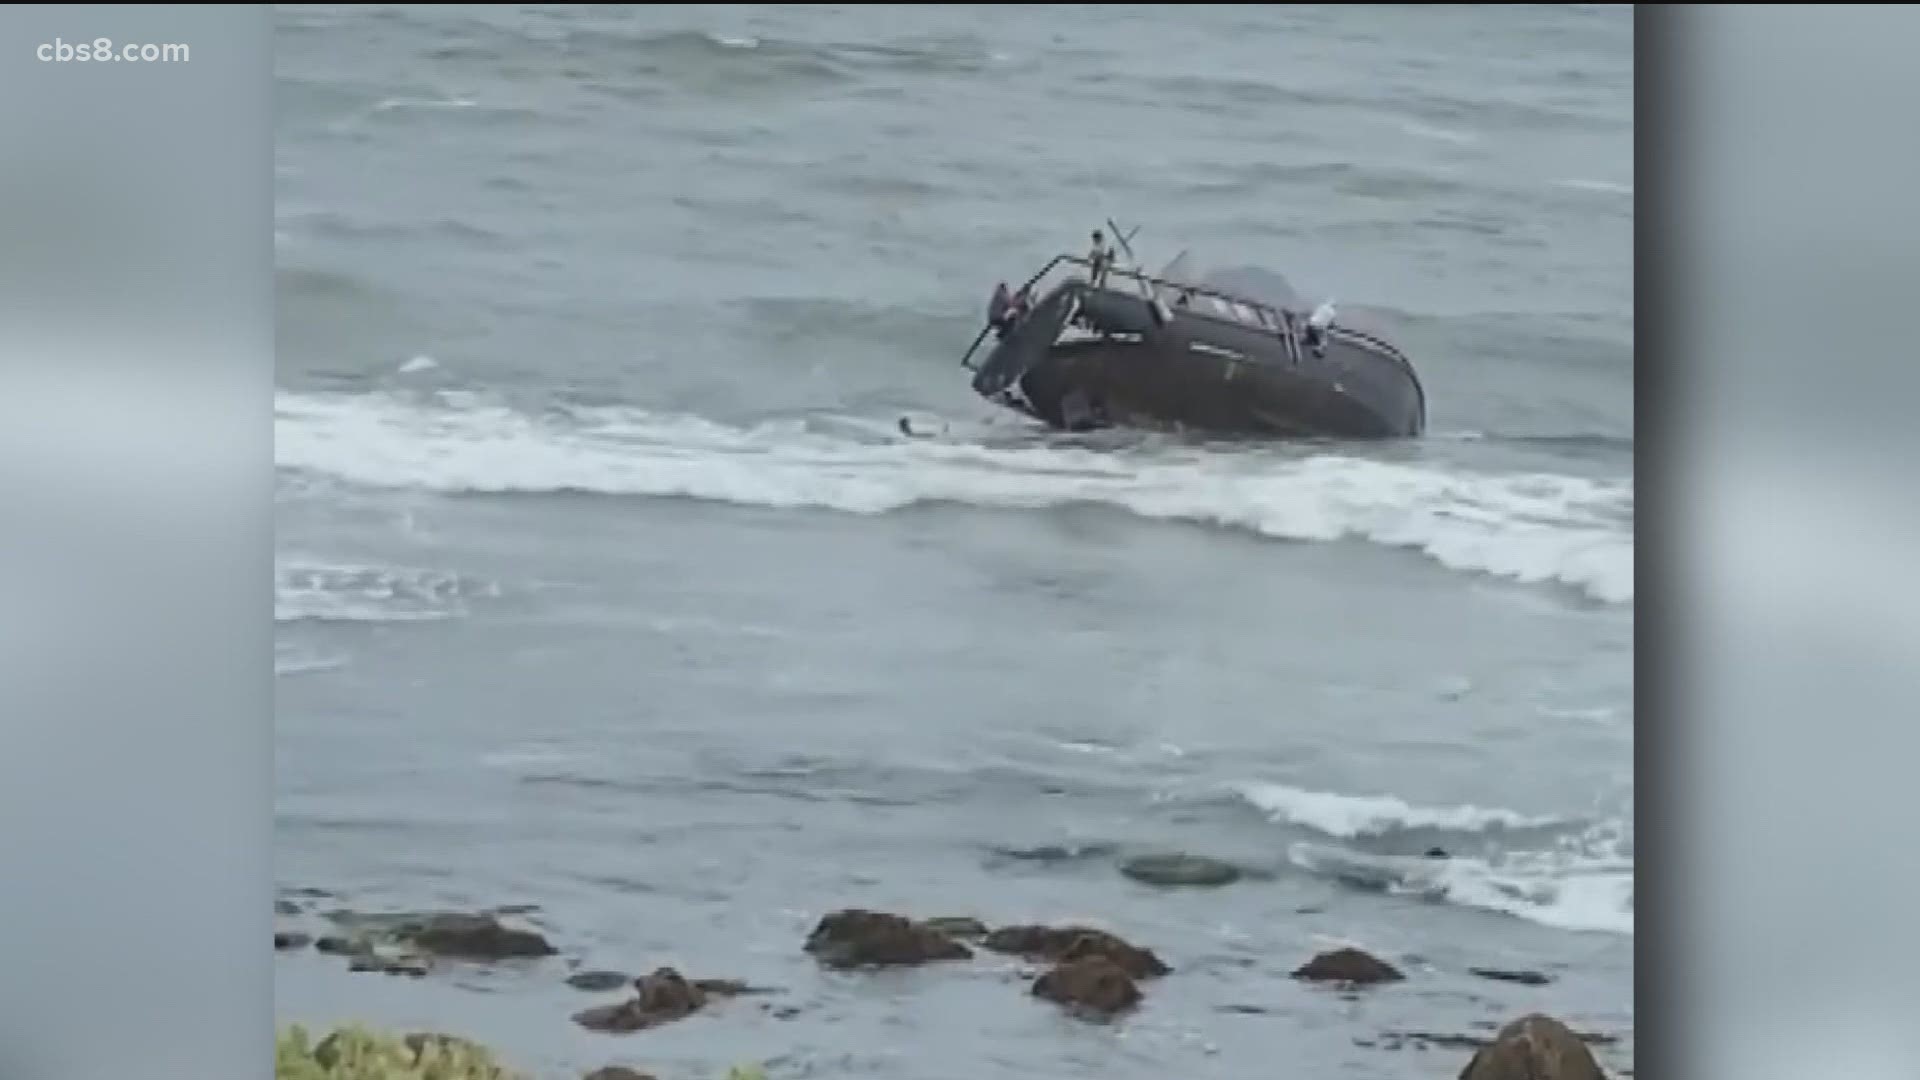 At lease three people died when the suspected smuggling boat broke apart on rocks at Point Loma.